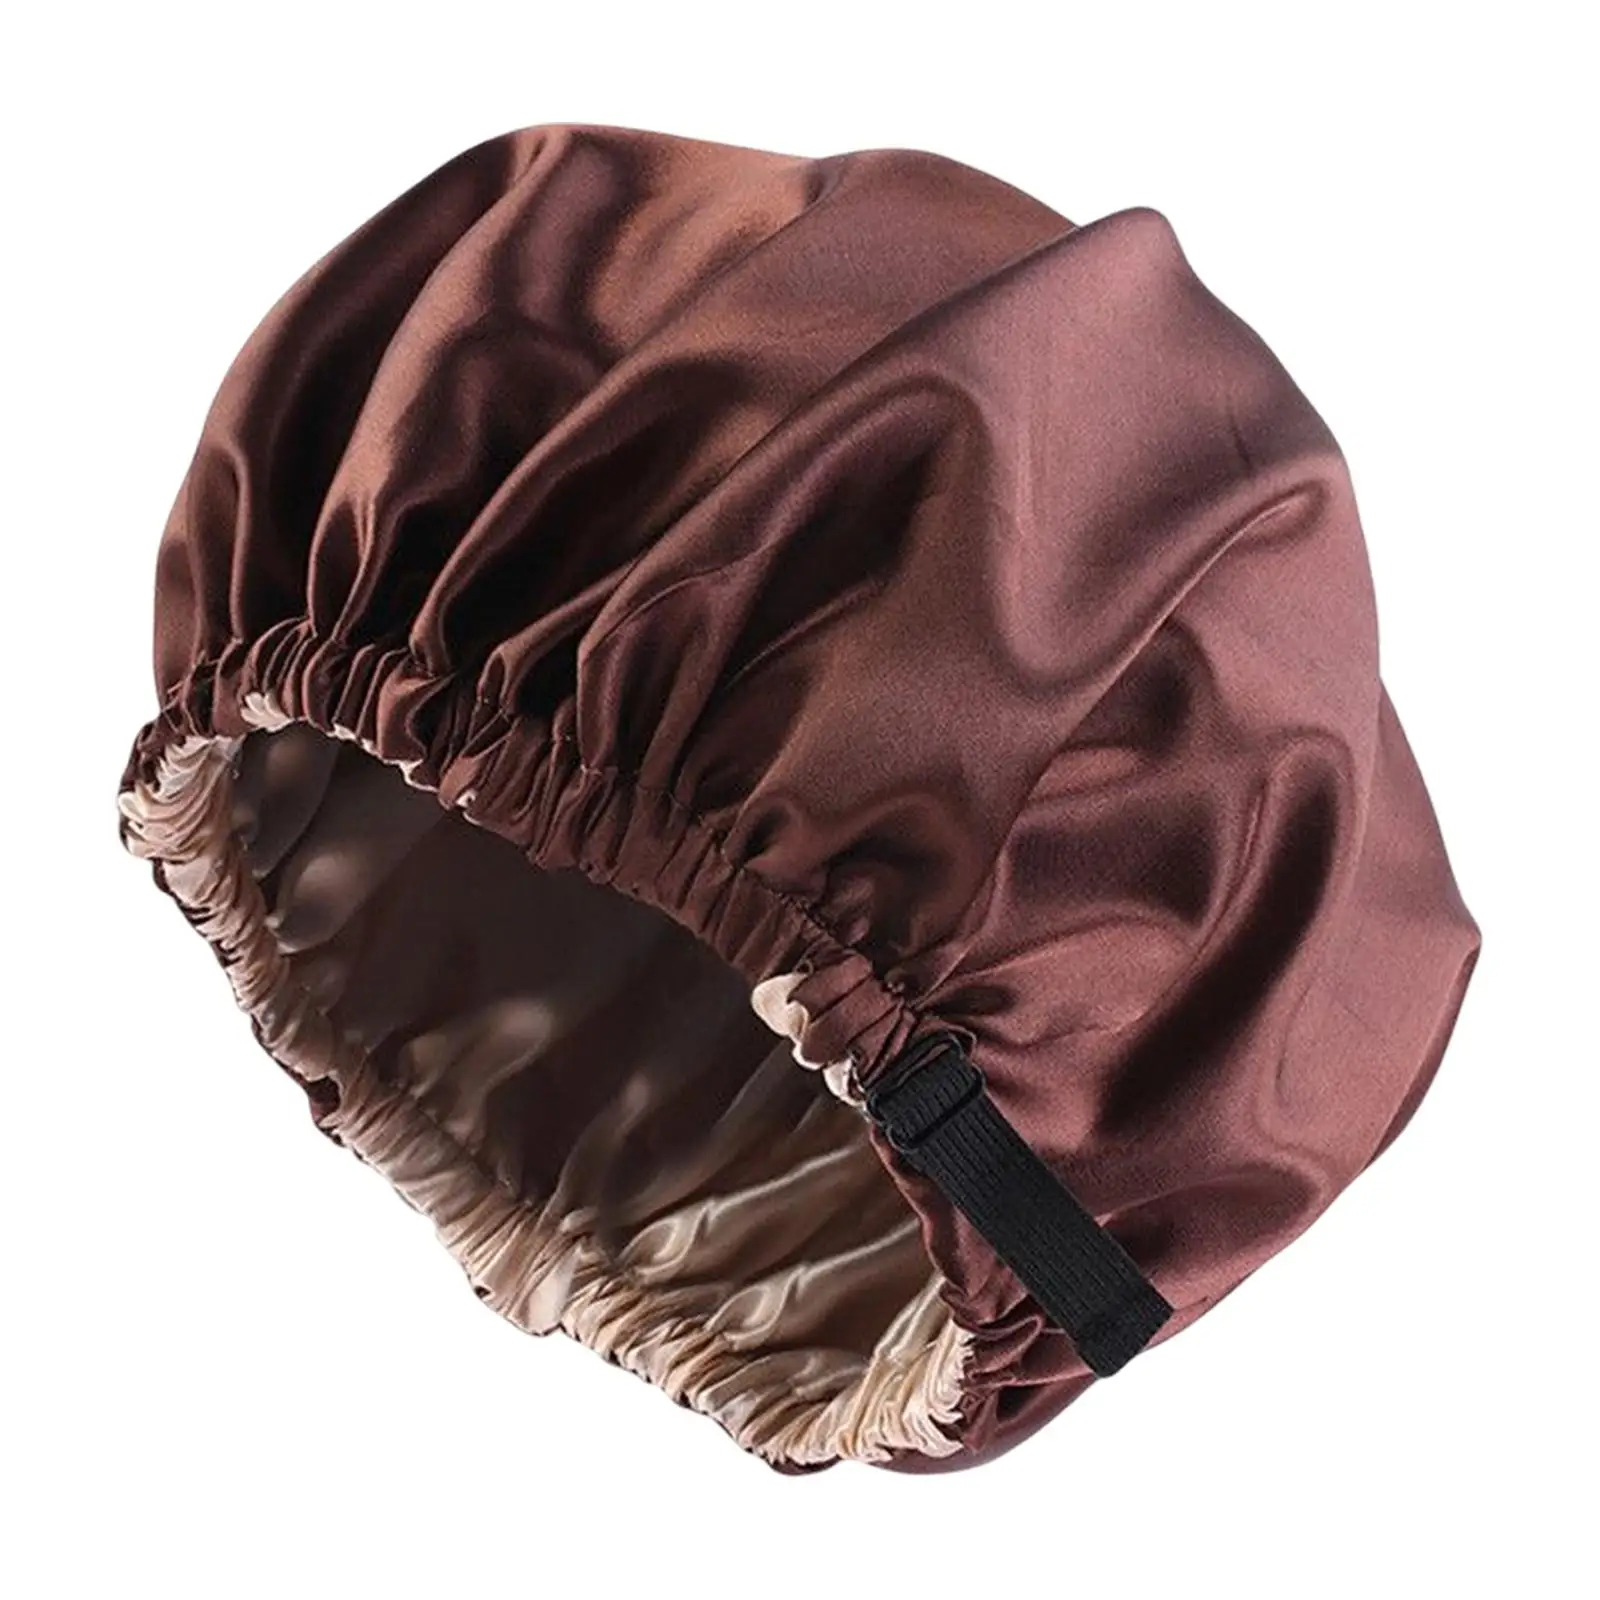 satin Caps Sleeping Caps Headwear Head cover Hat Elastic Band Soft Round Shower Hat for Women girls Curly Hair